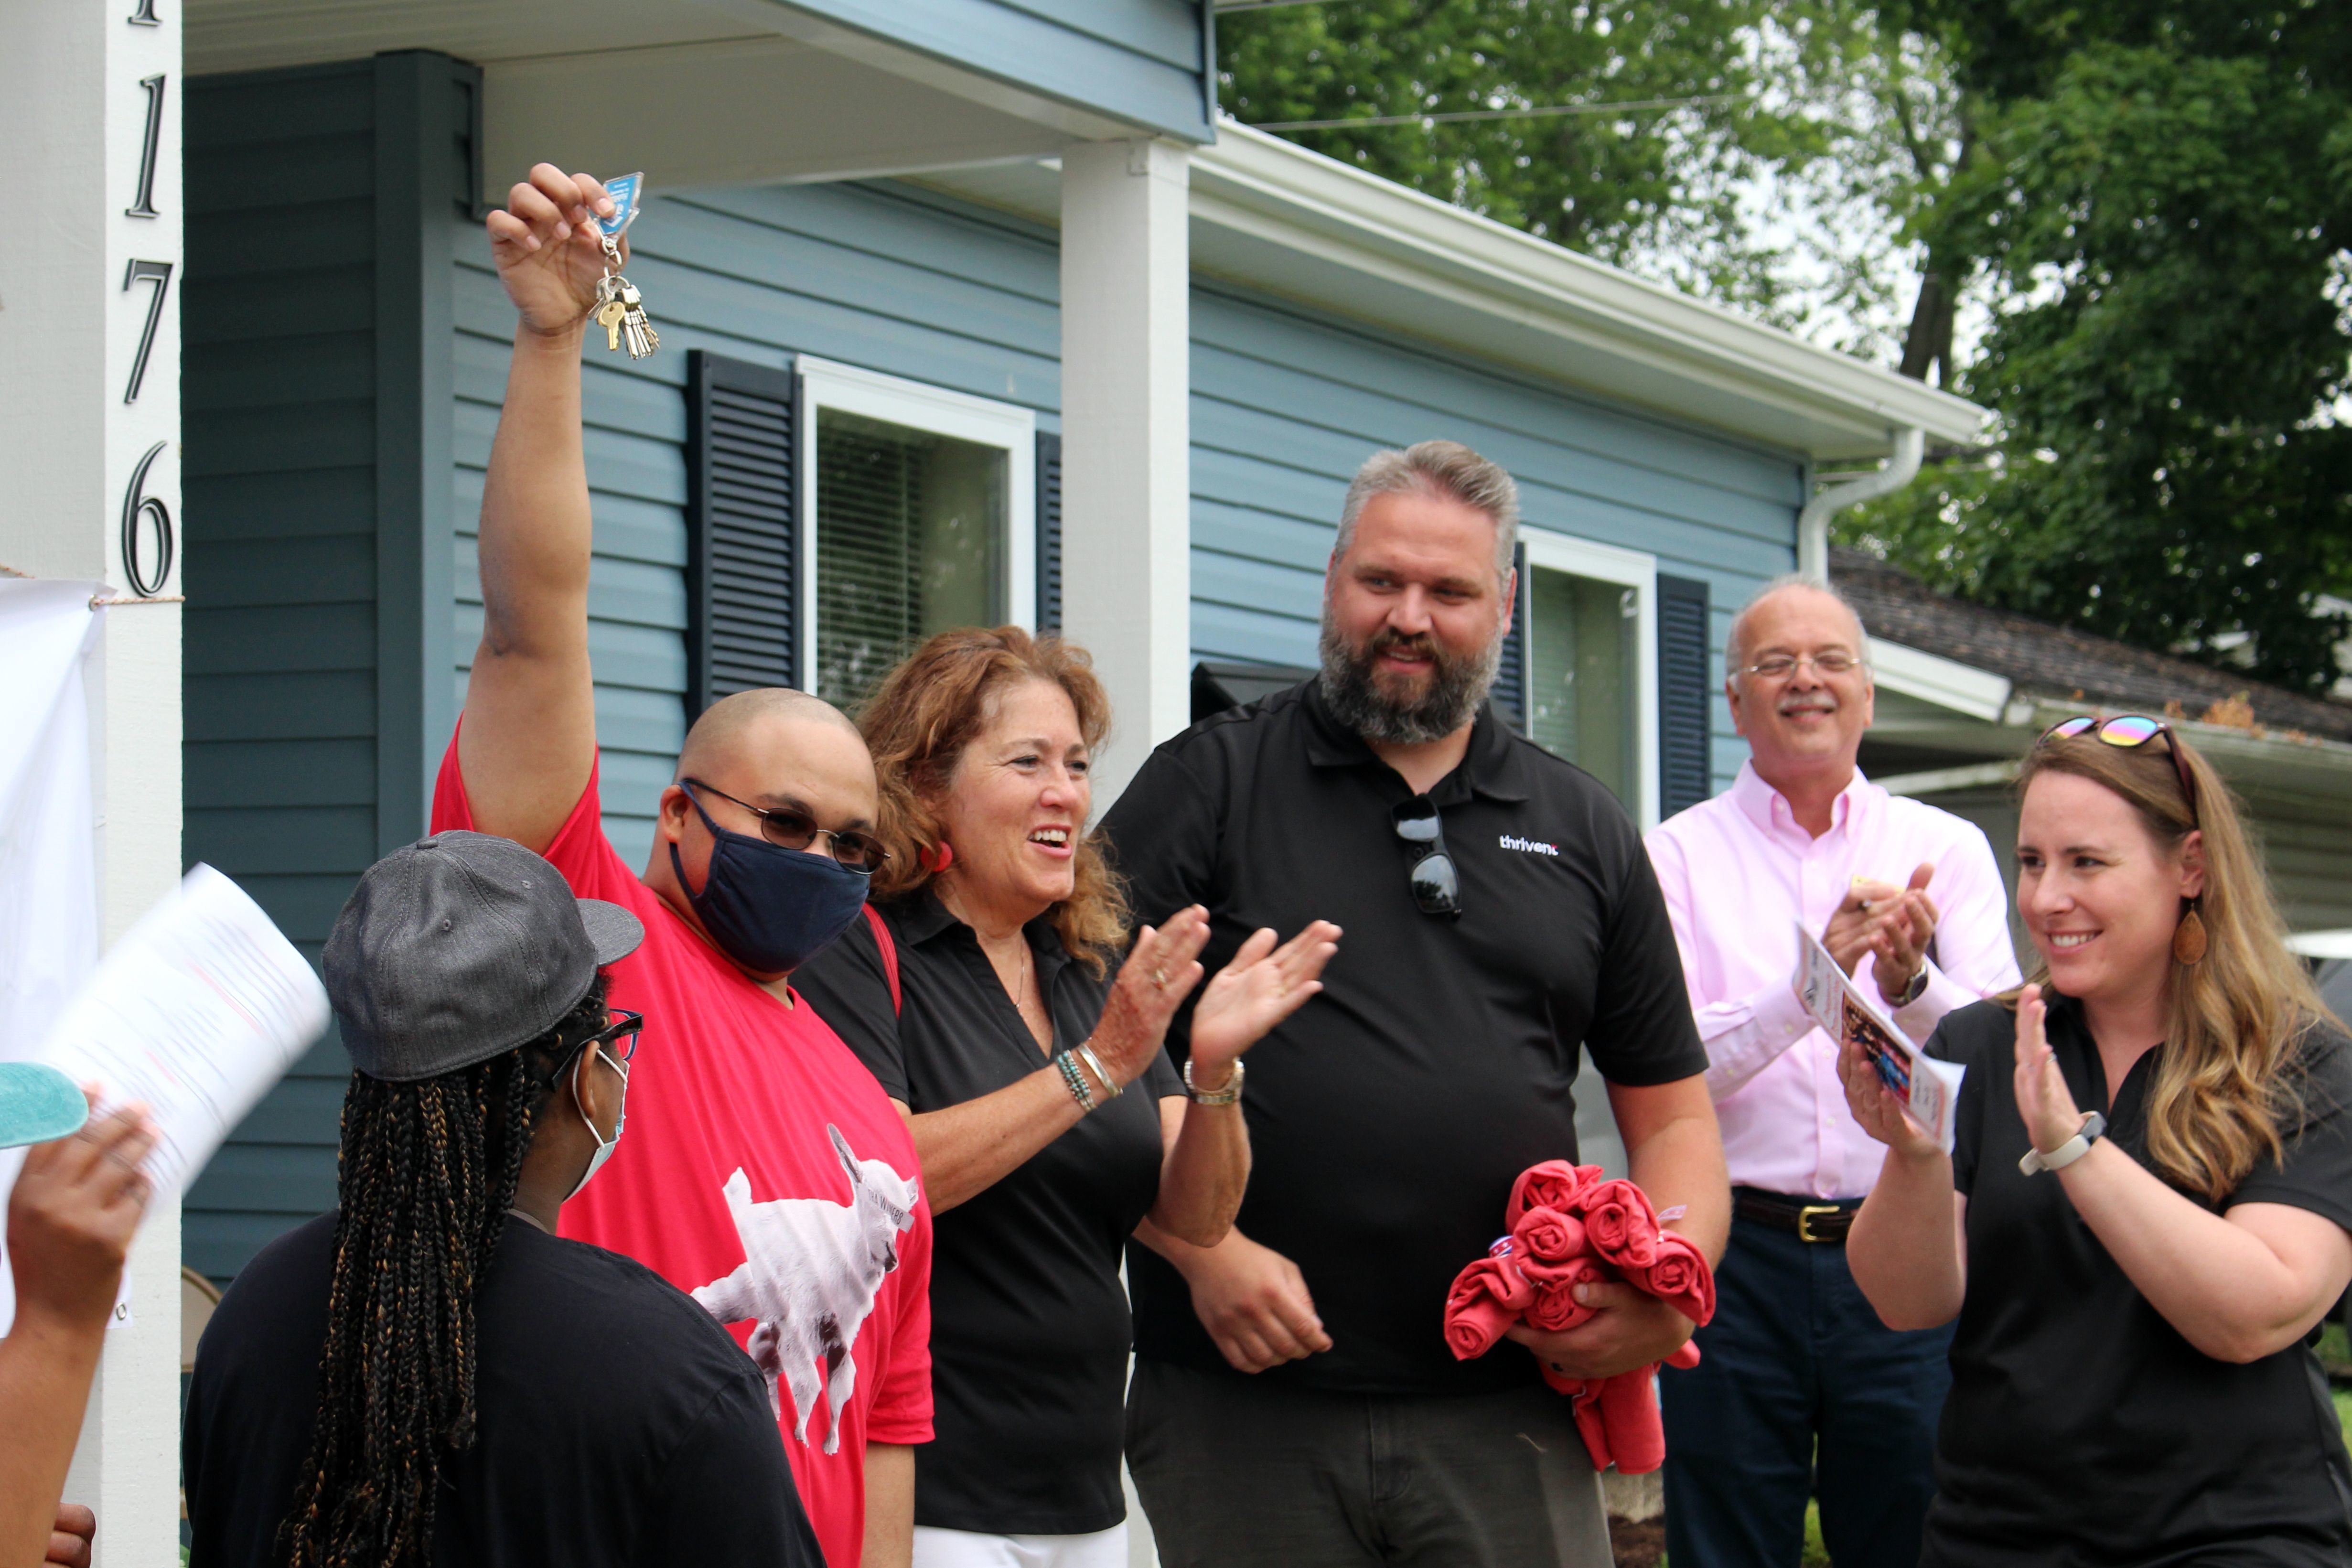 A Dayton area family finds safety, security, and stability in the form of their new home thanks to volunteers, community, and donors.